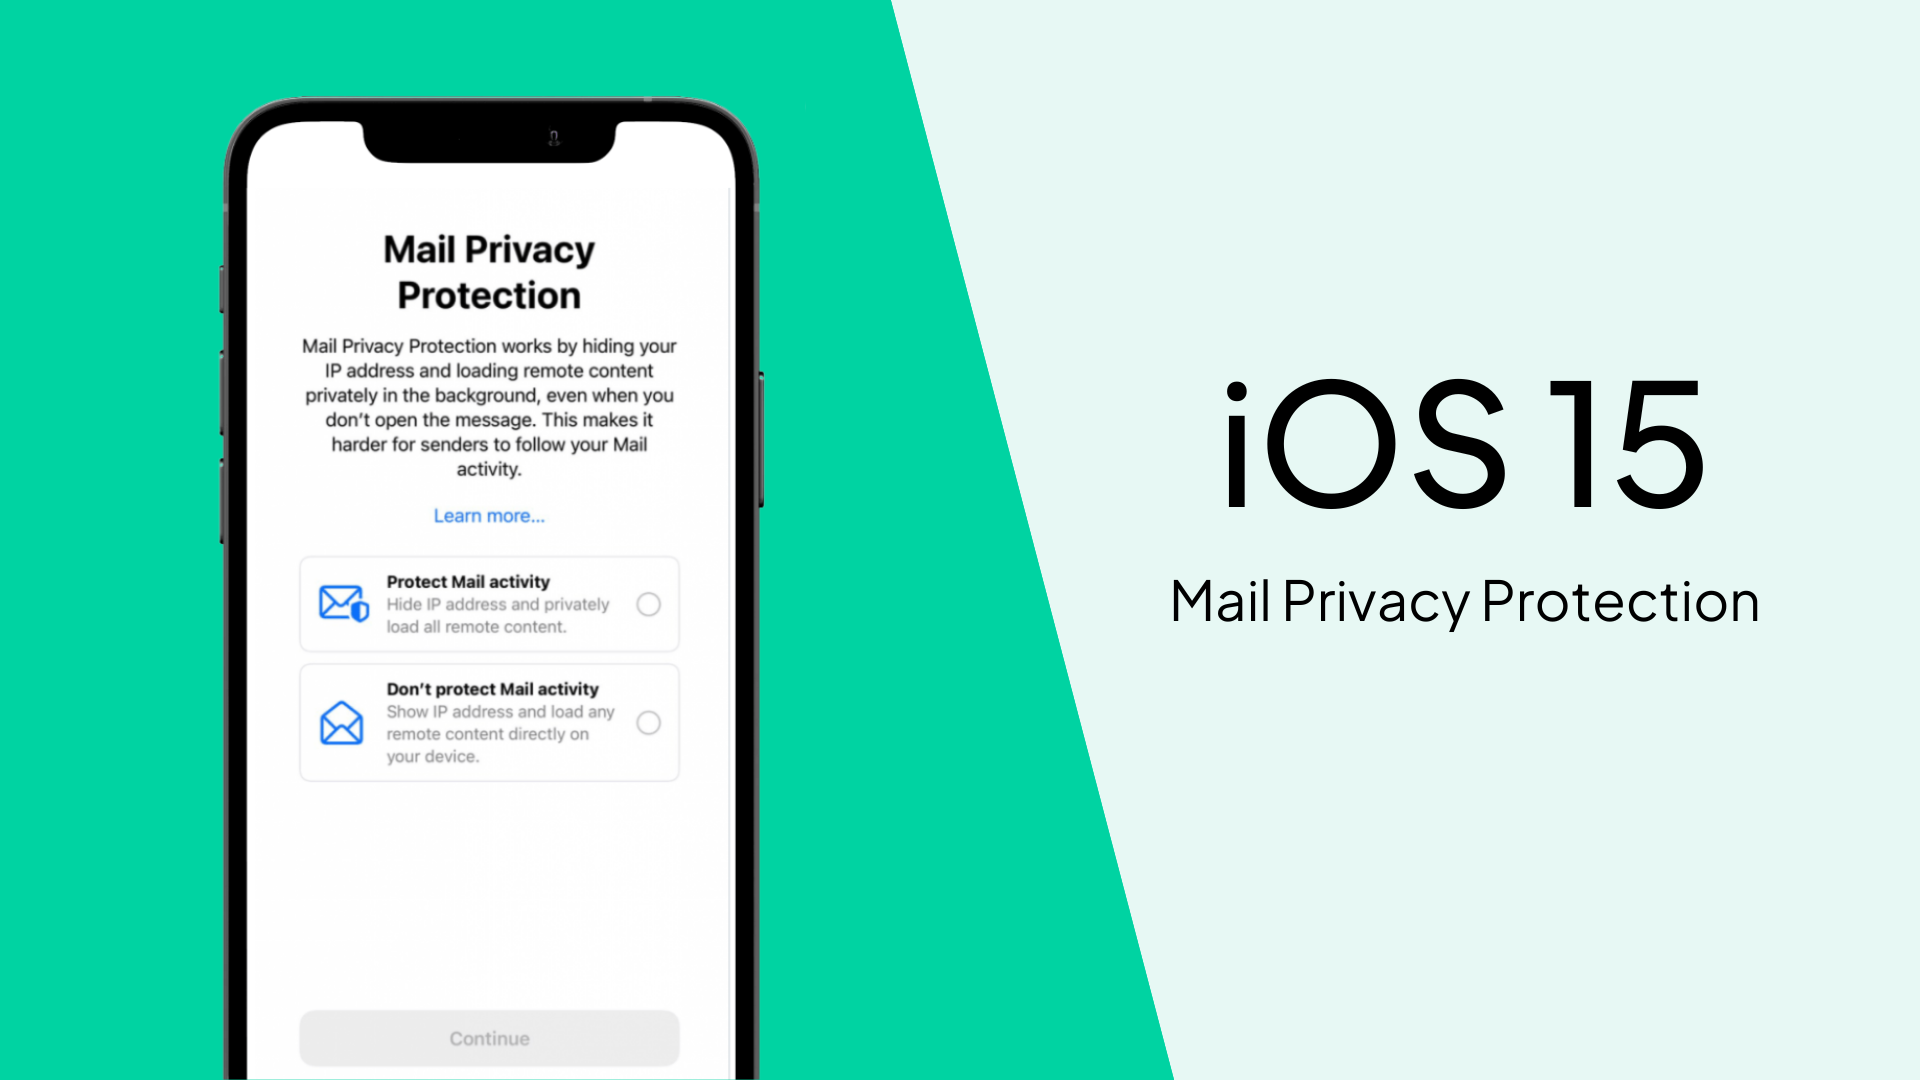 ios 15 mail privacy protection